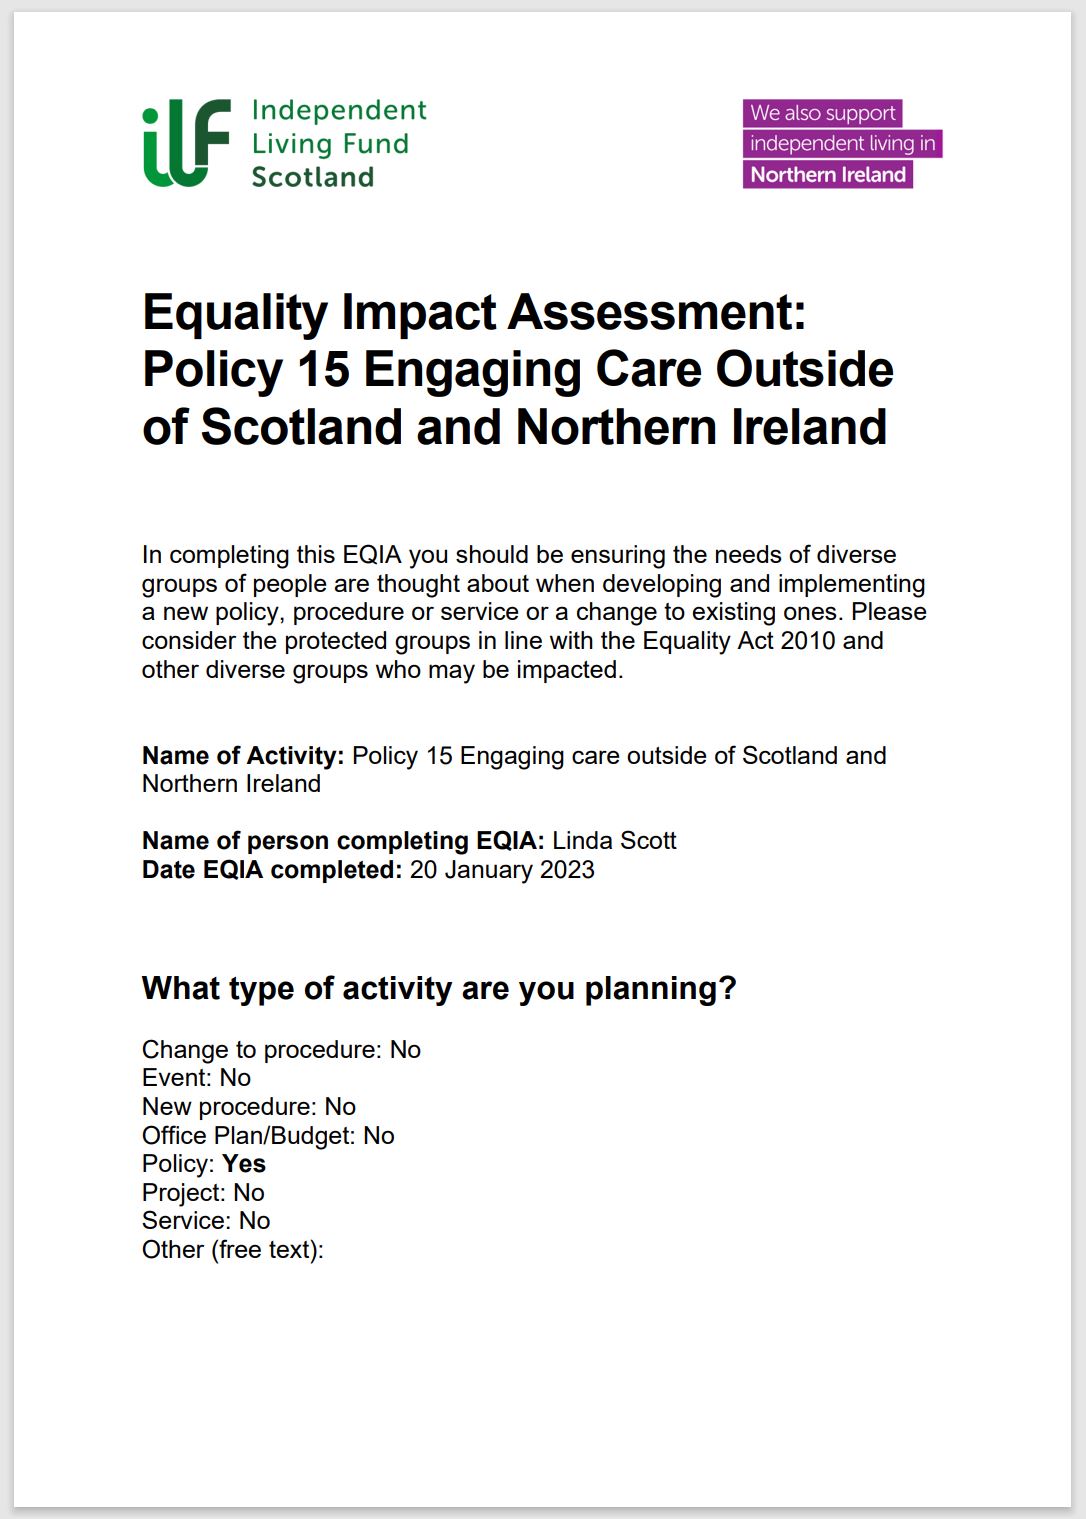 Cover page for Equality Impact Assessment record for policy 15.